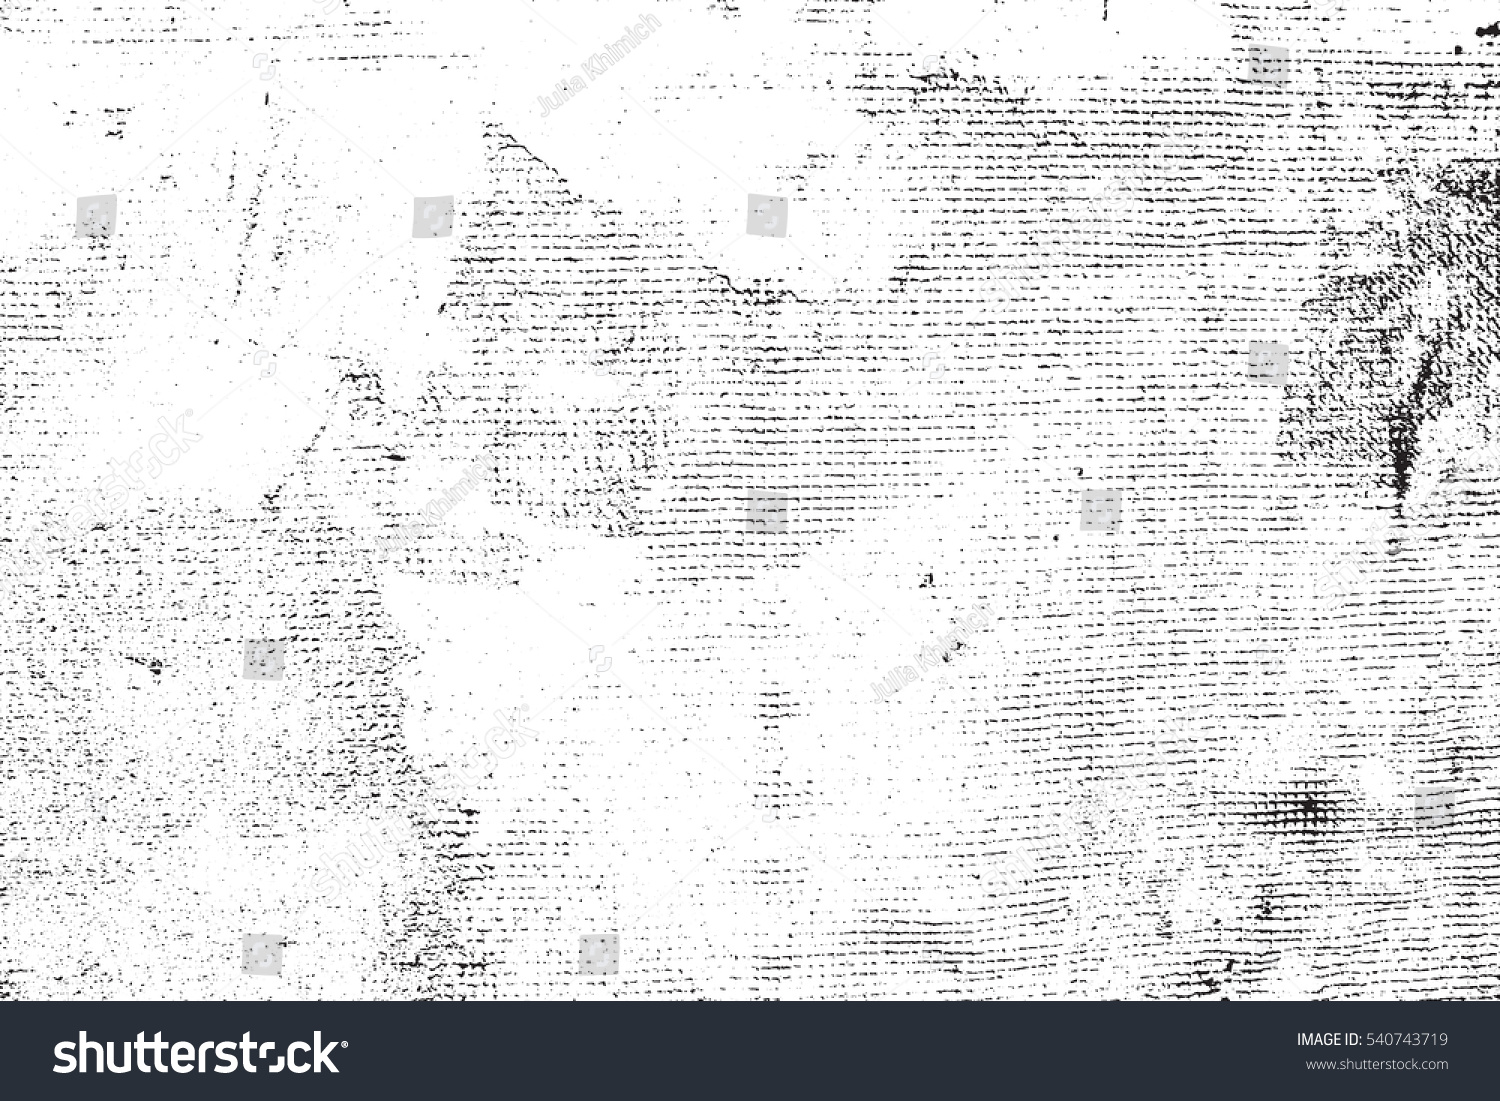 Vector grunge texture. Abstract background, old concrete wall. Overlay illustration over any design to create grungy vintage effect and depth. For posters, banners, retro and urban designs. #540743719